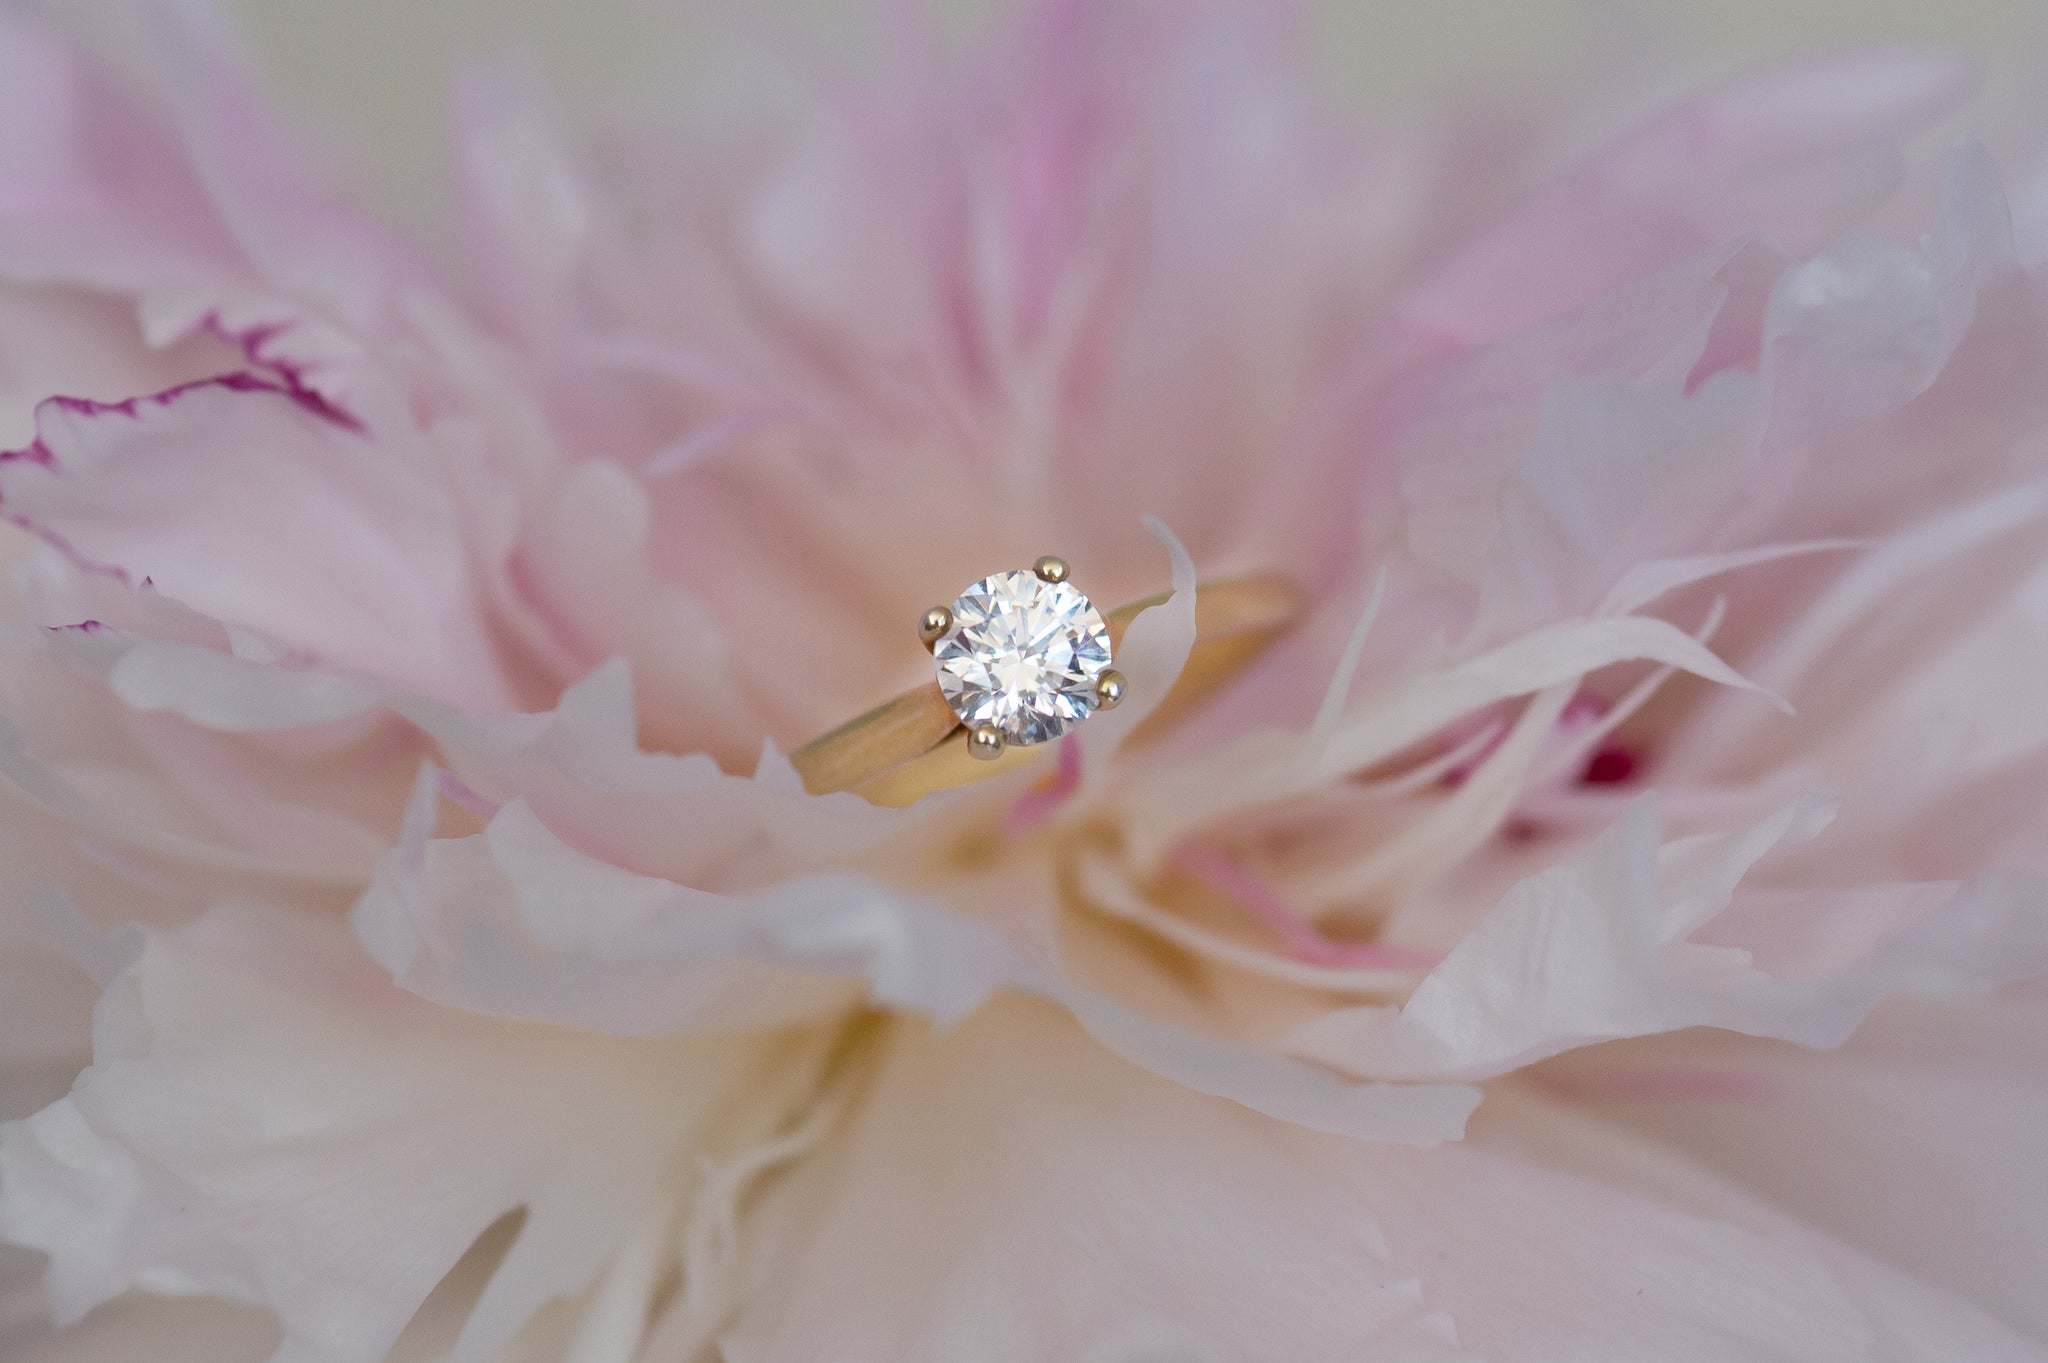 How to get the perfect engagement ring for any budget